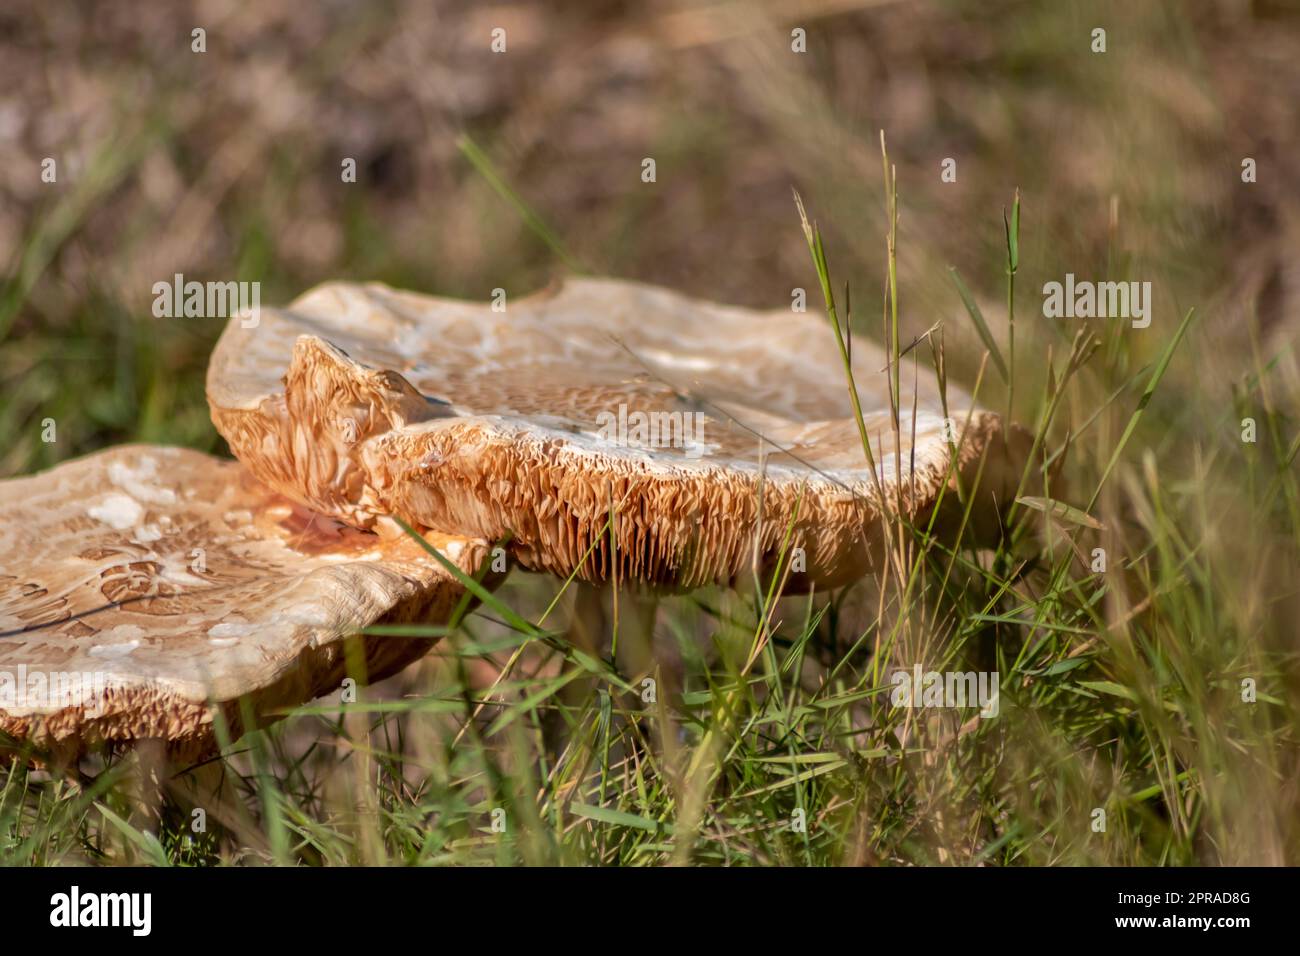 Big mushrooms in a forest found on mushrooming tour in autumn with brown foliage in backlight on the ground in mushroom season as delicious but possibly poisonous and dangerous forest fruit Stock Photo